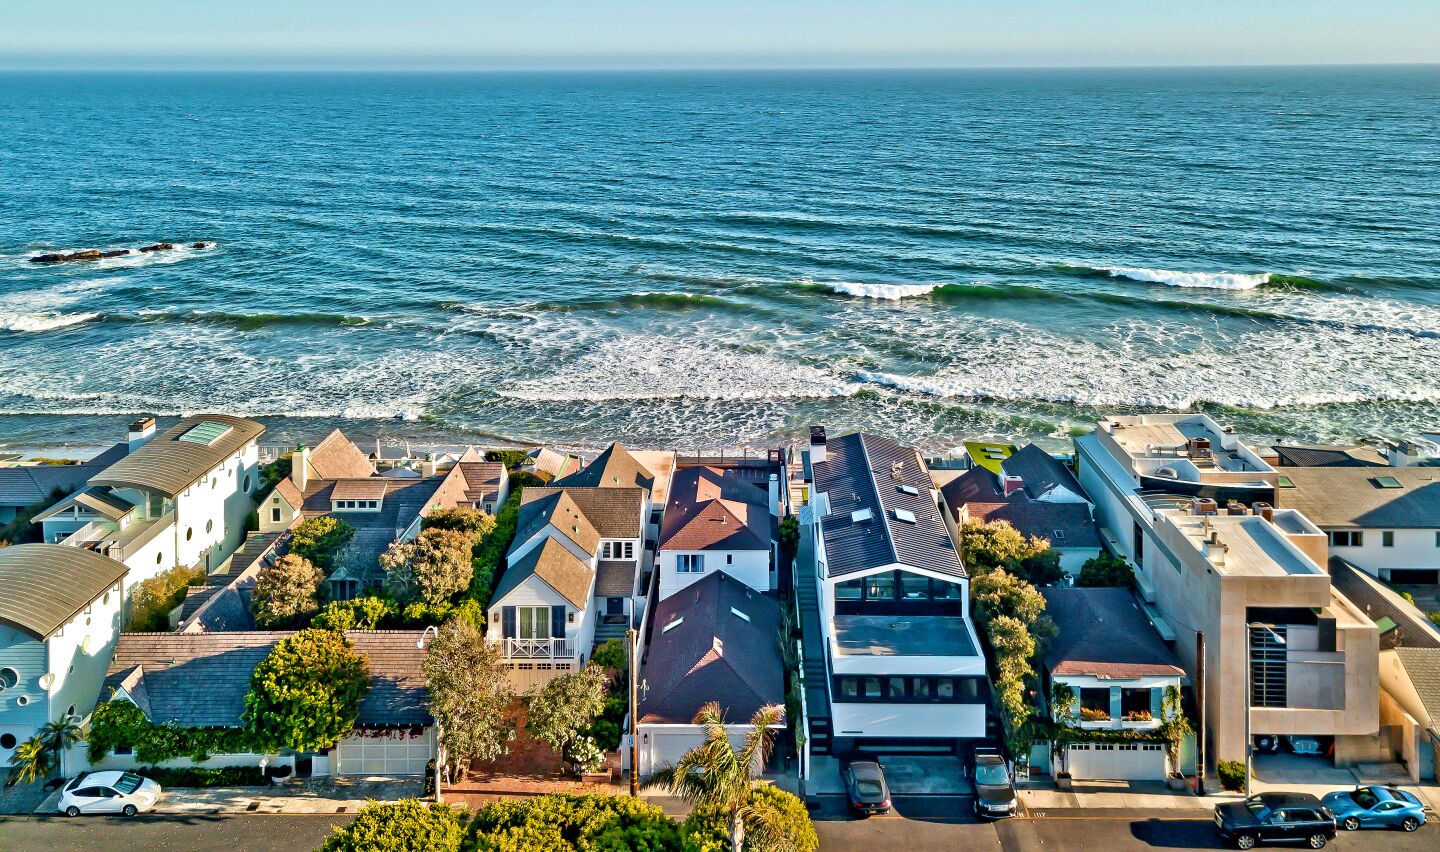 An aerial view of closely packed, ocean-facing mansions at Malibu Colony Beach.